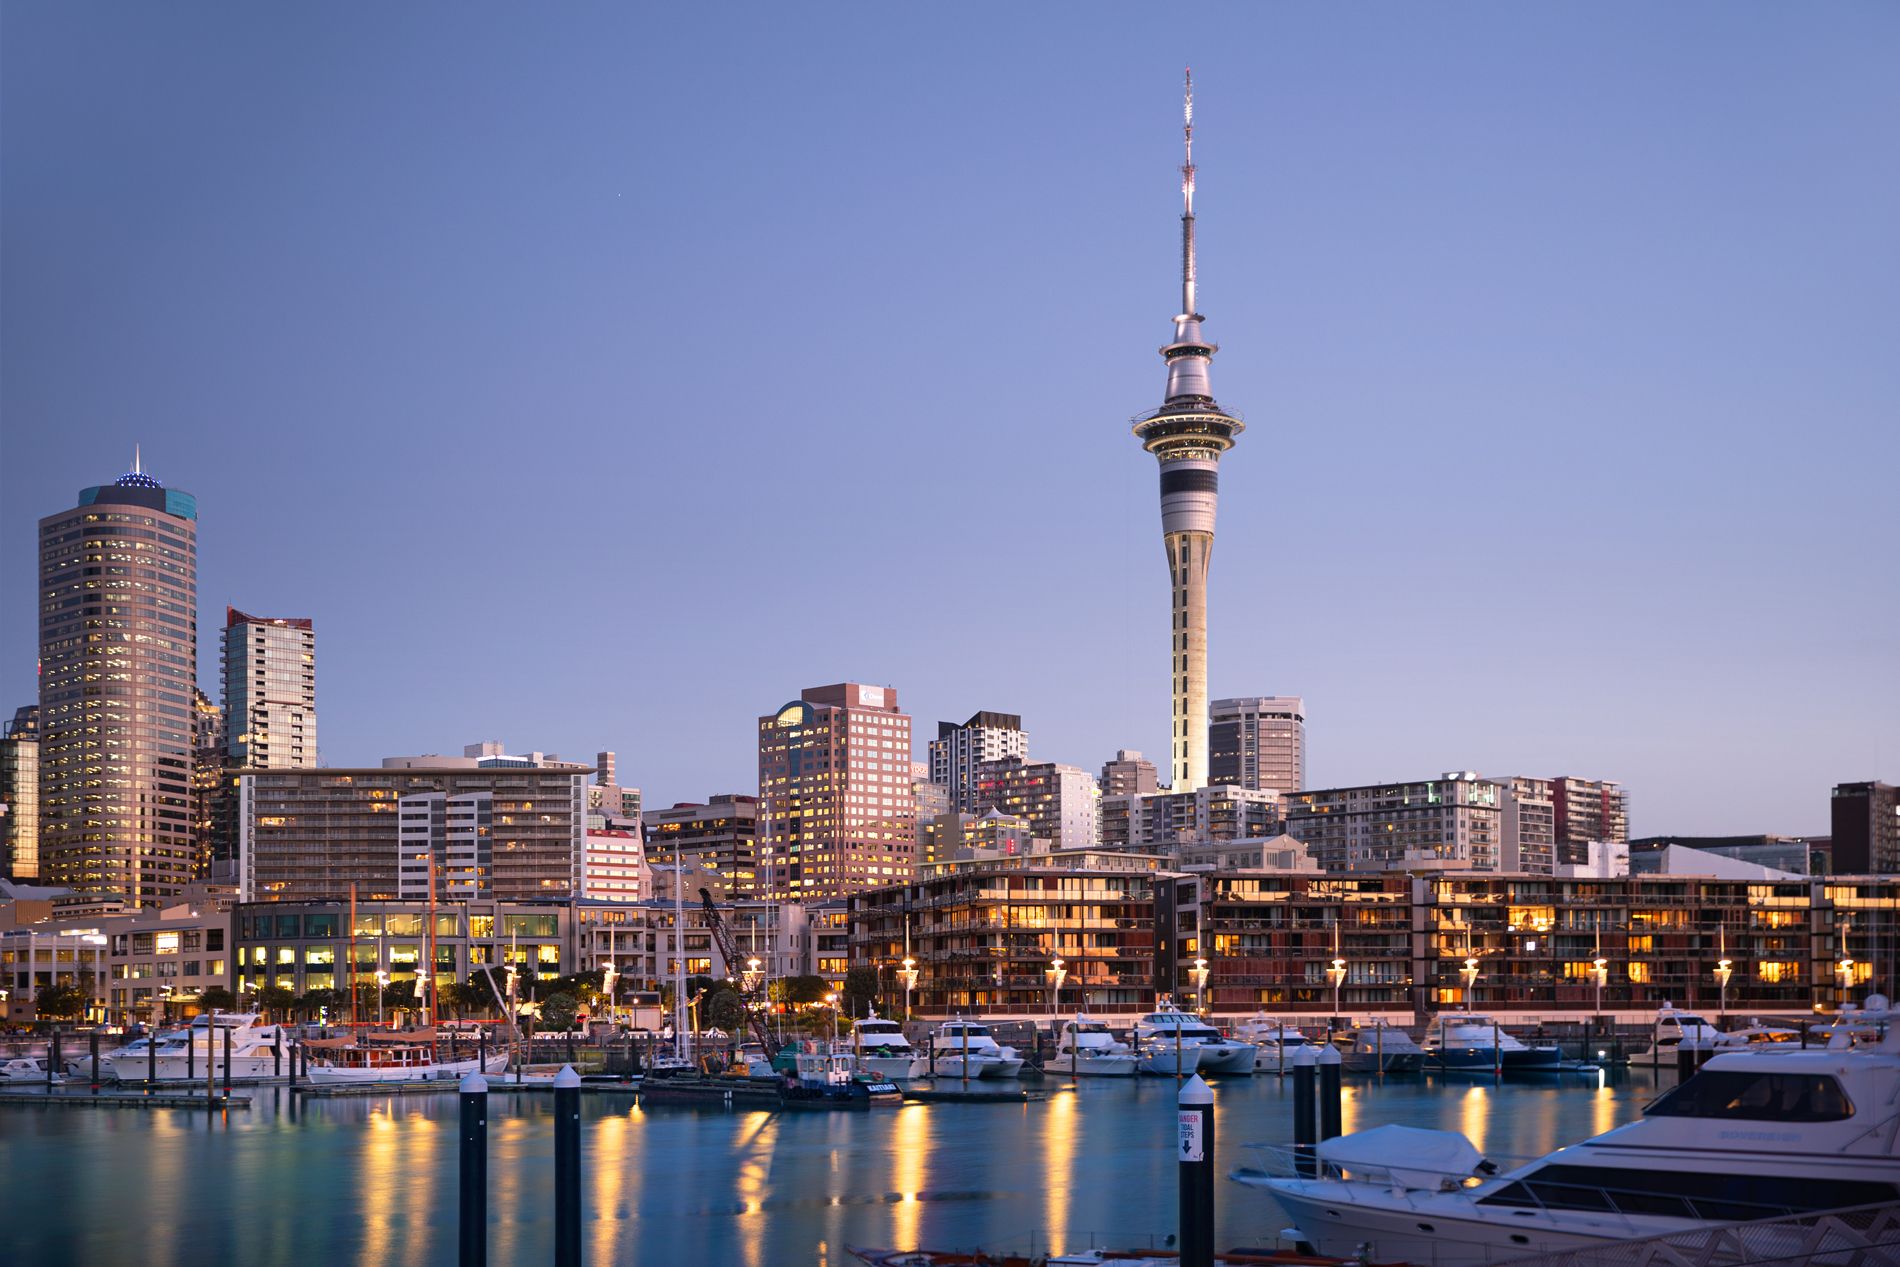 When the time is right, we welcome you to Auckland, New Zealand